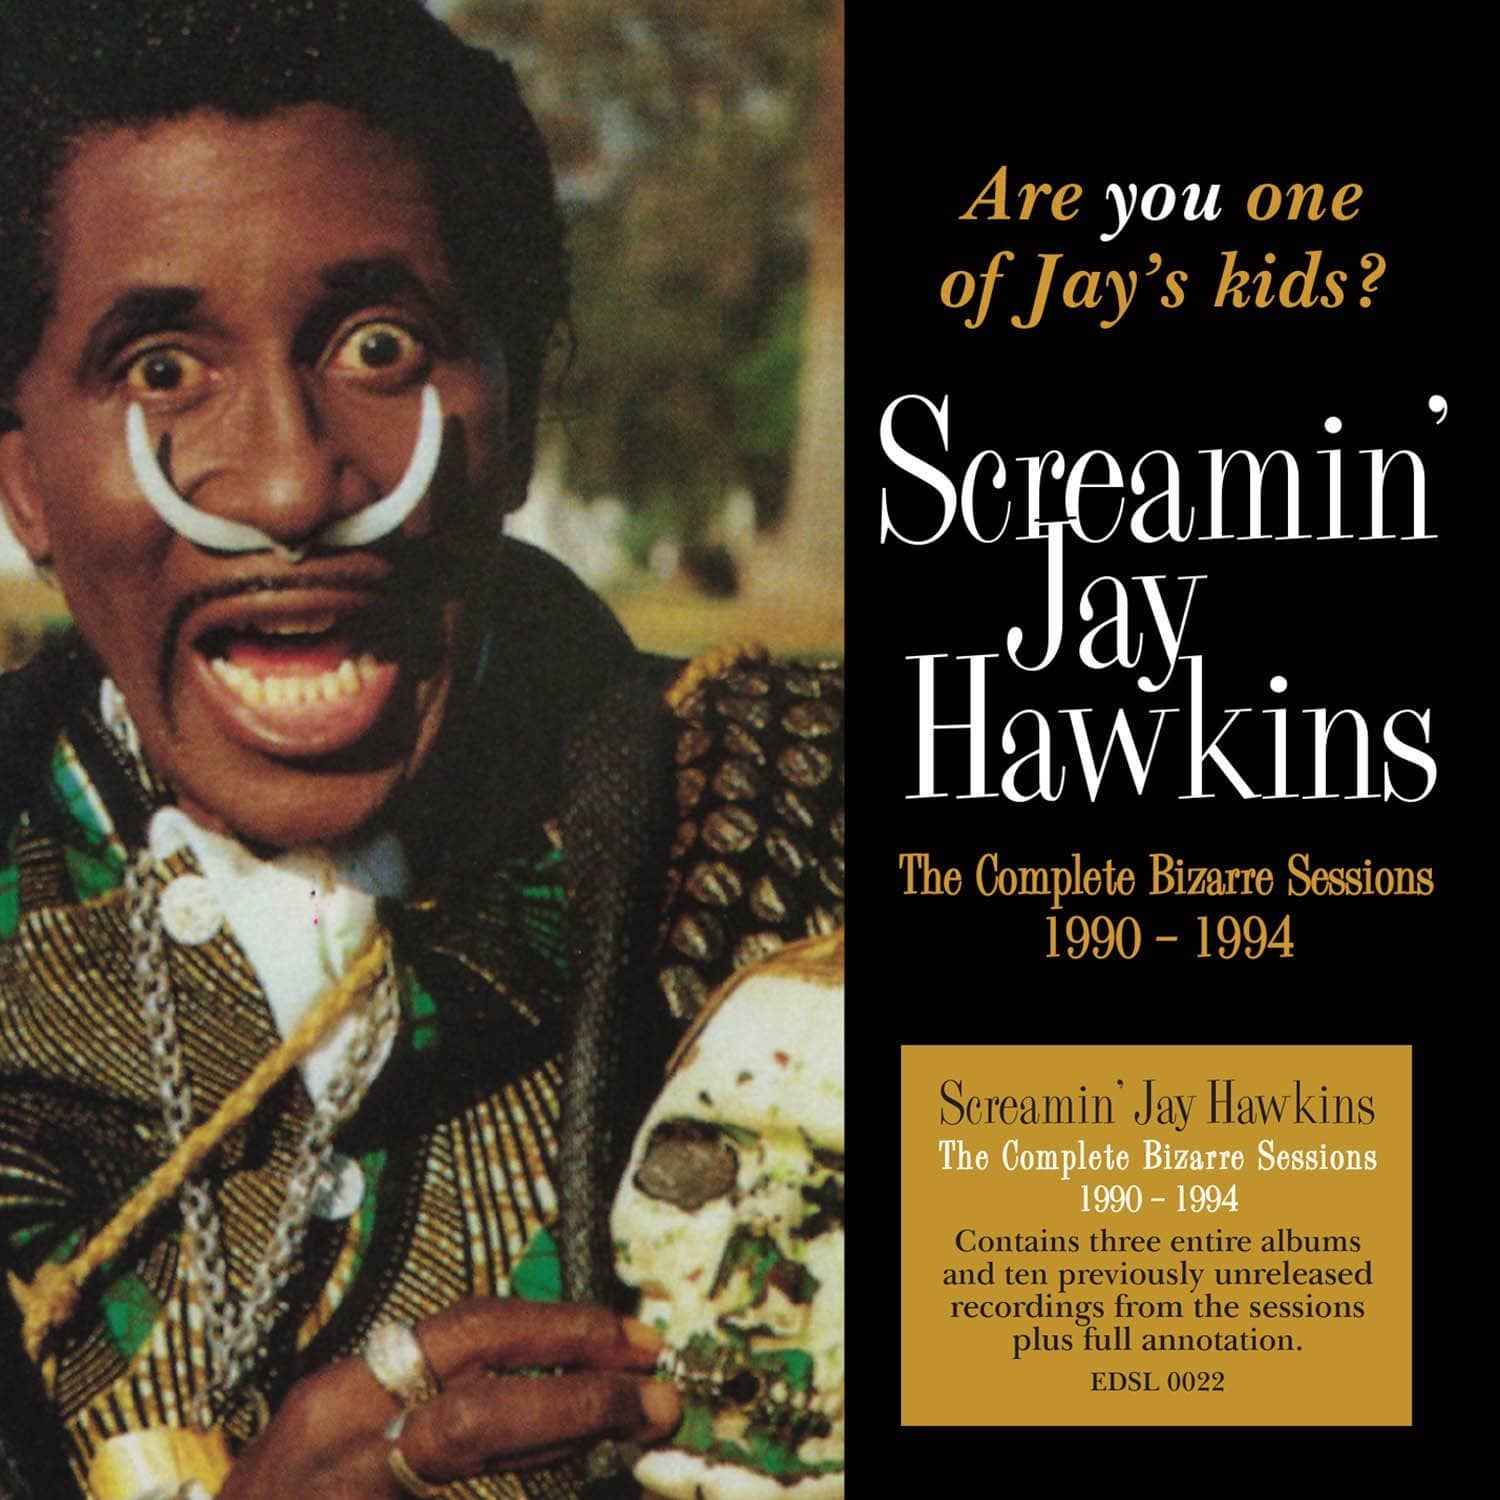 Screamin’ Jay Hawkins: Are YOU One of Jay’s Kids? — The Complete Bizarre Sessions 1990-1994